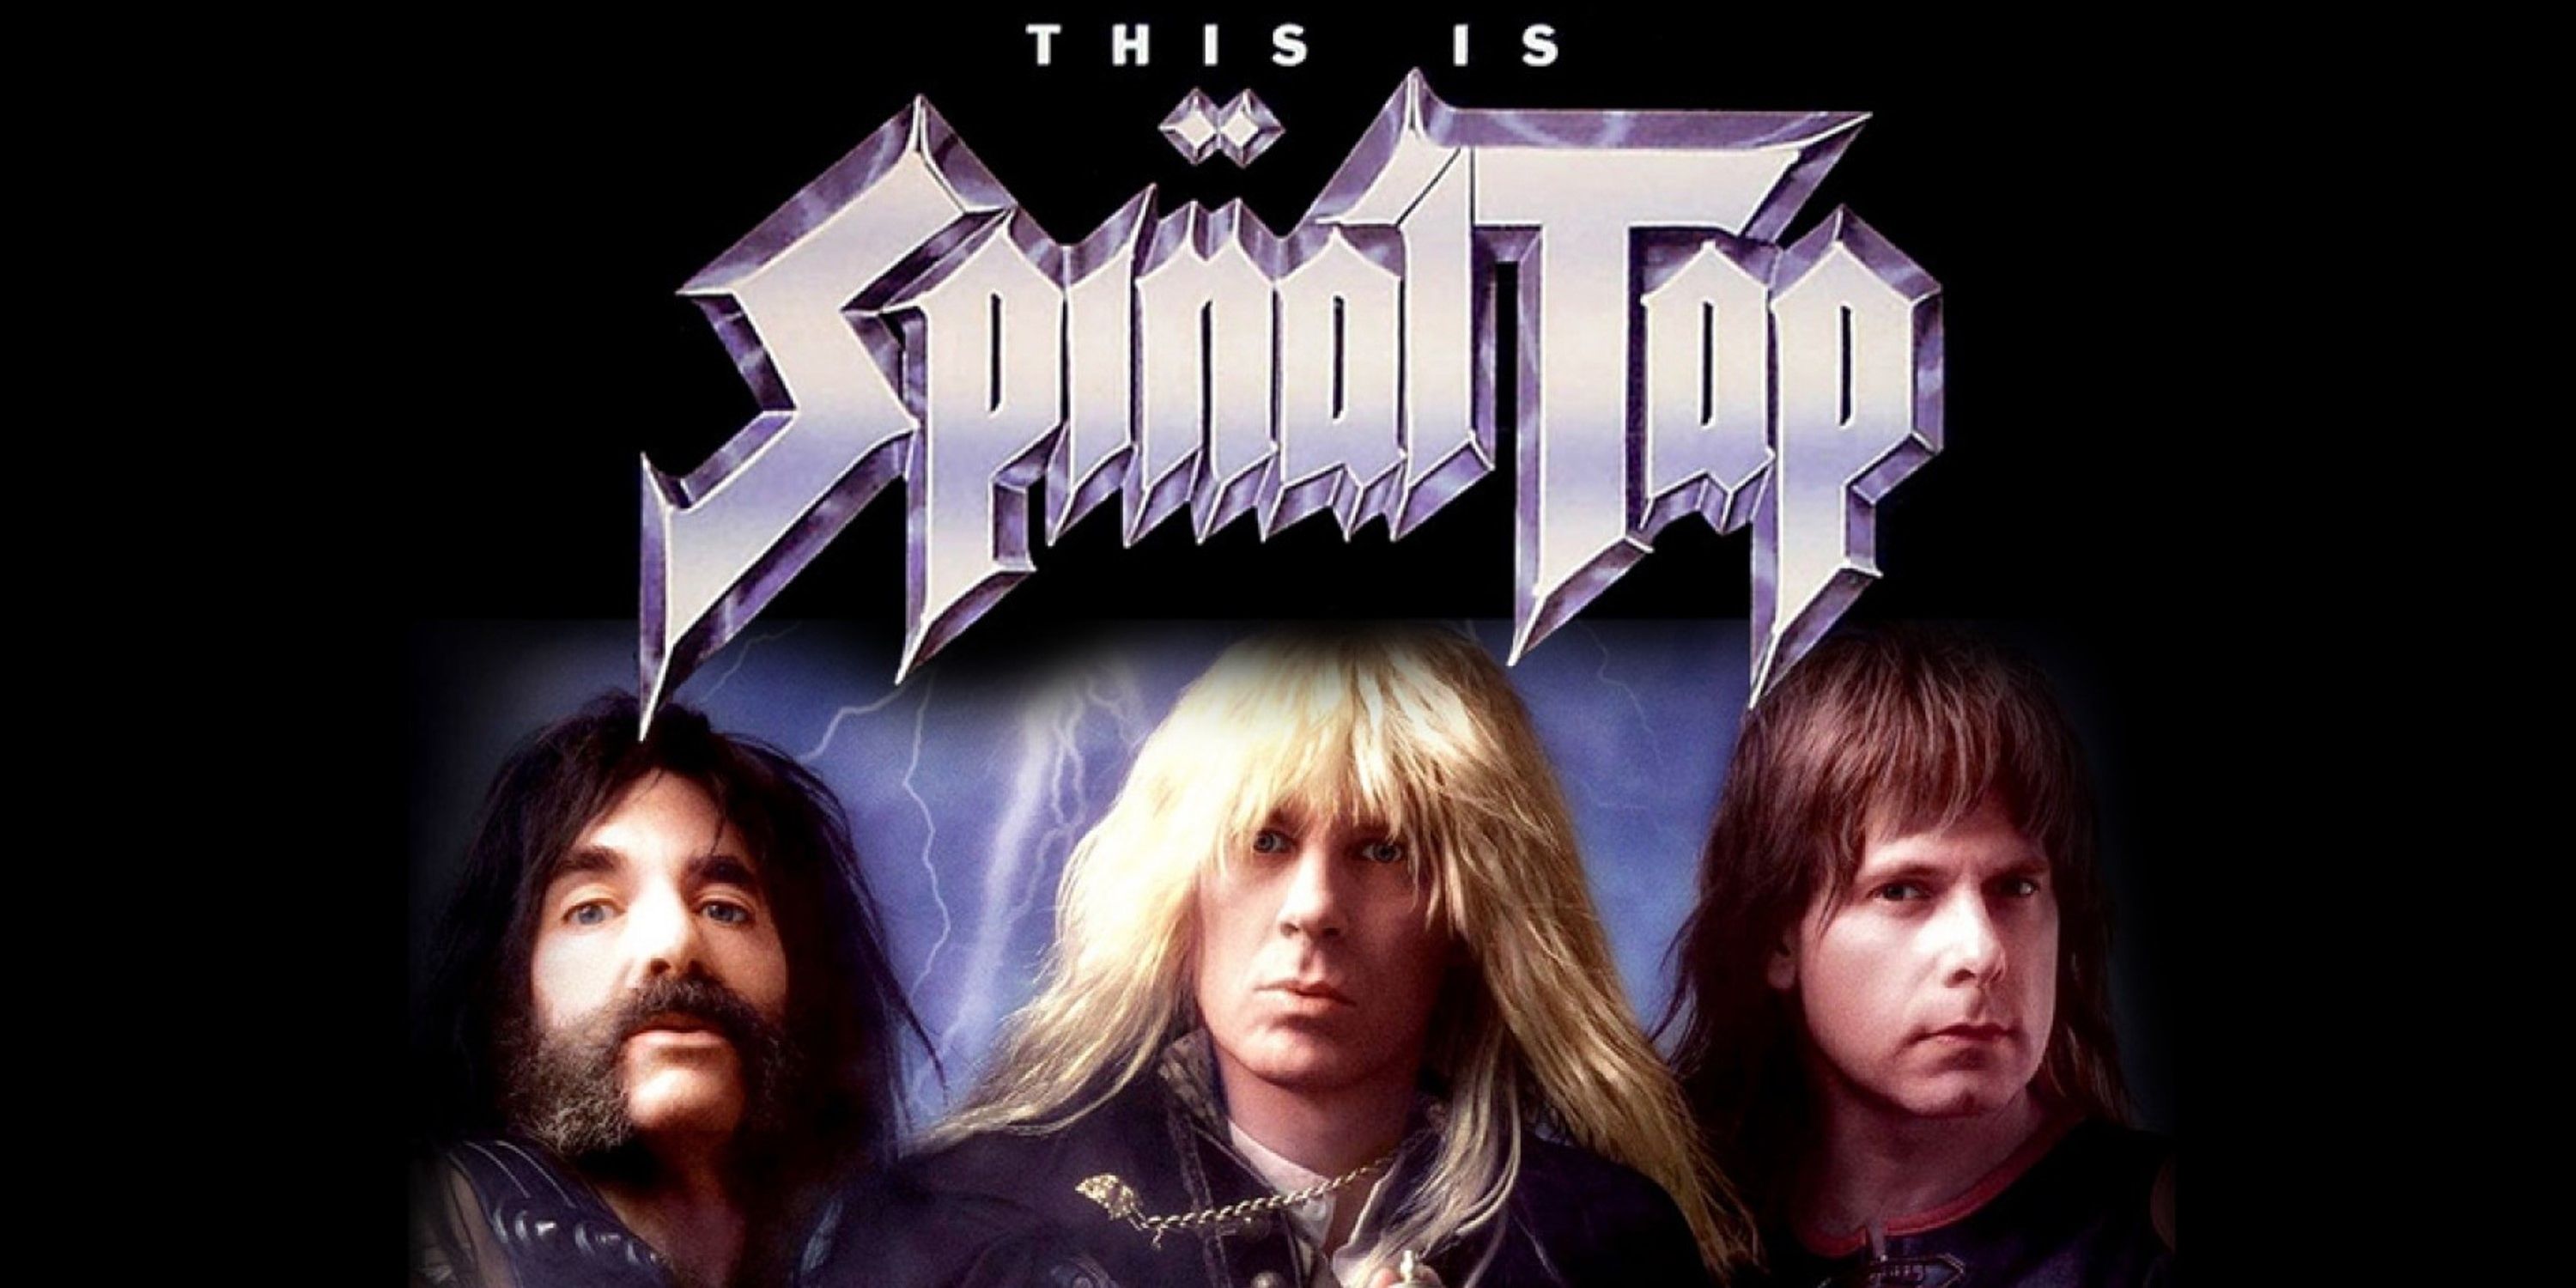 Nigel, David, and Derek on a This is Spinal Tap album cover